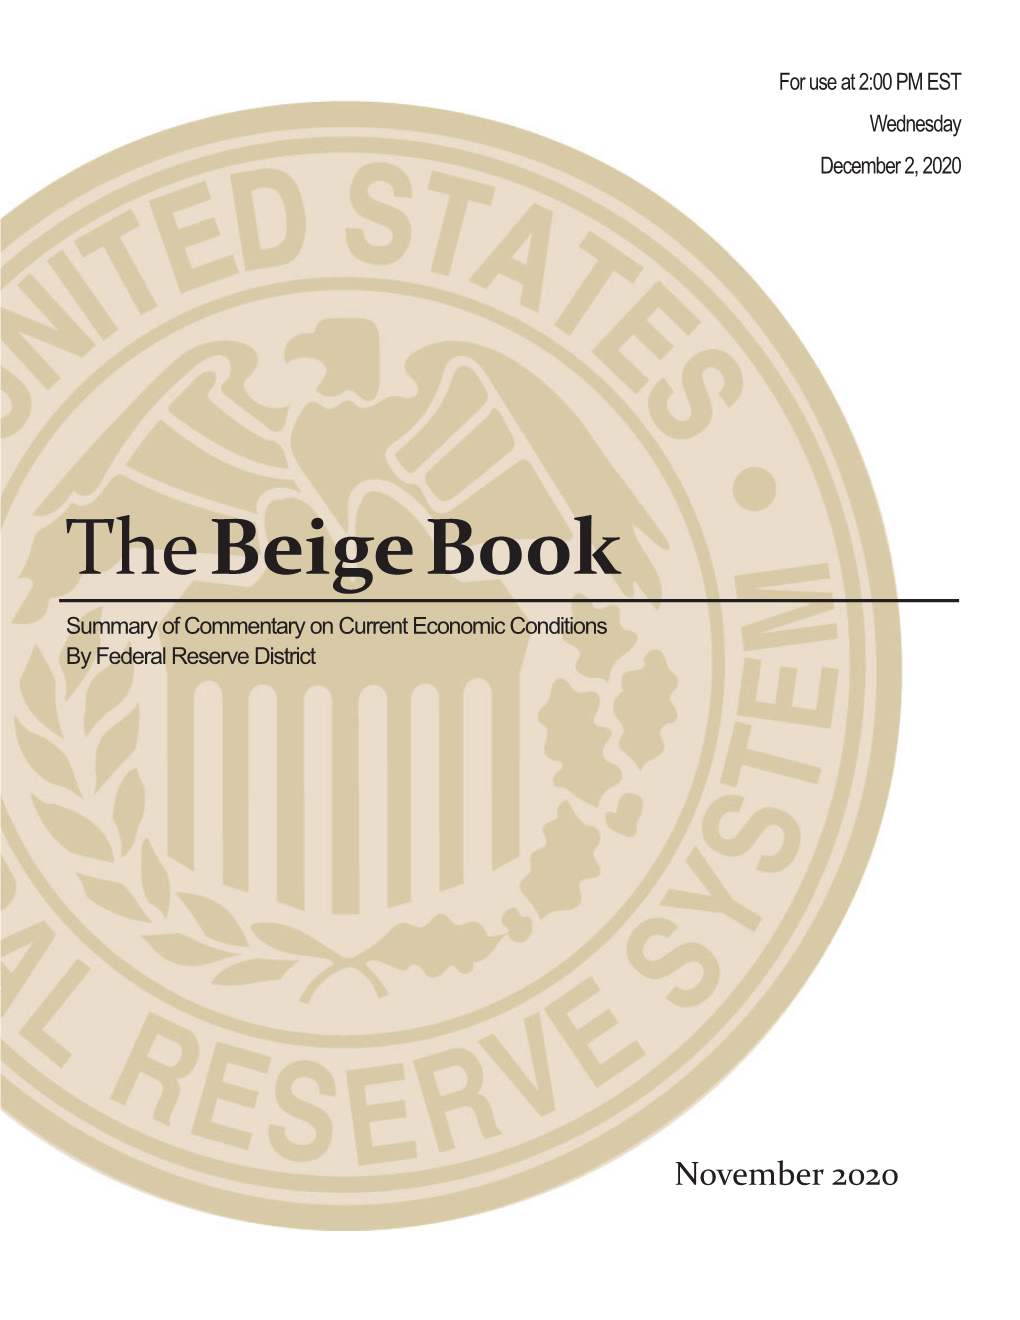 Beige Book Summary of Commentary on Current Economic Conditions by Federal Reserve District